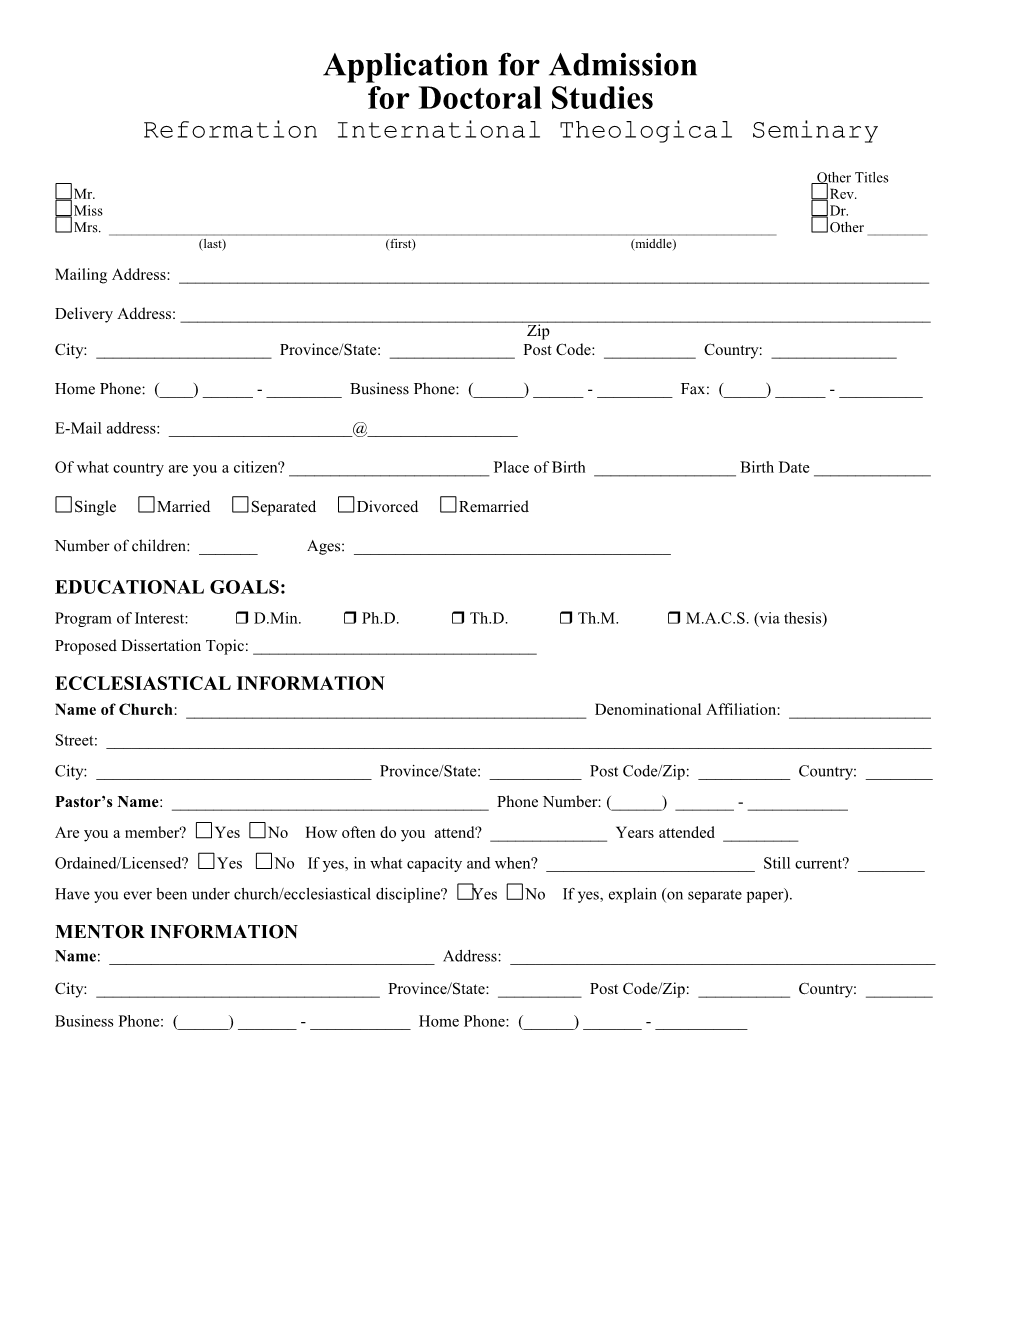 Application for Admissions